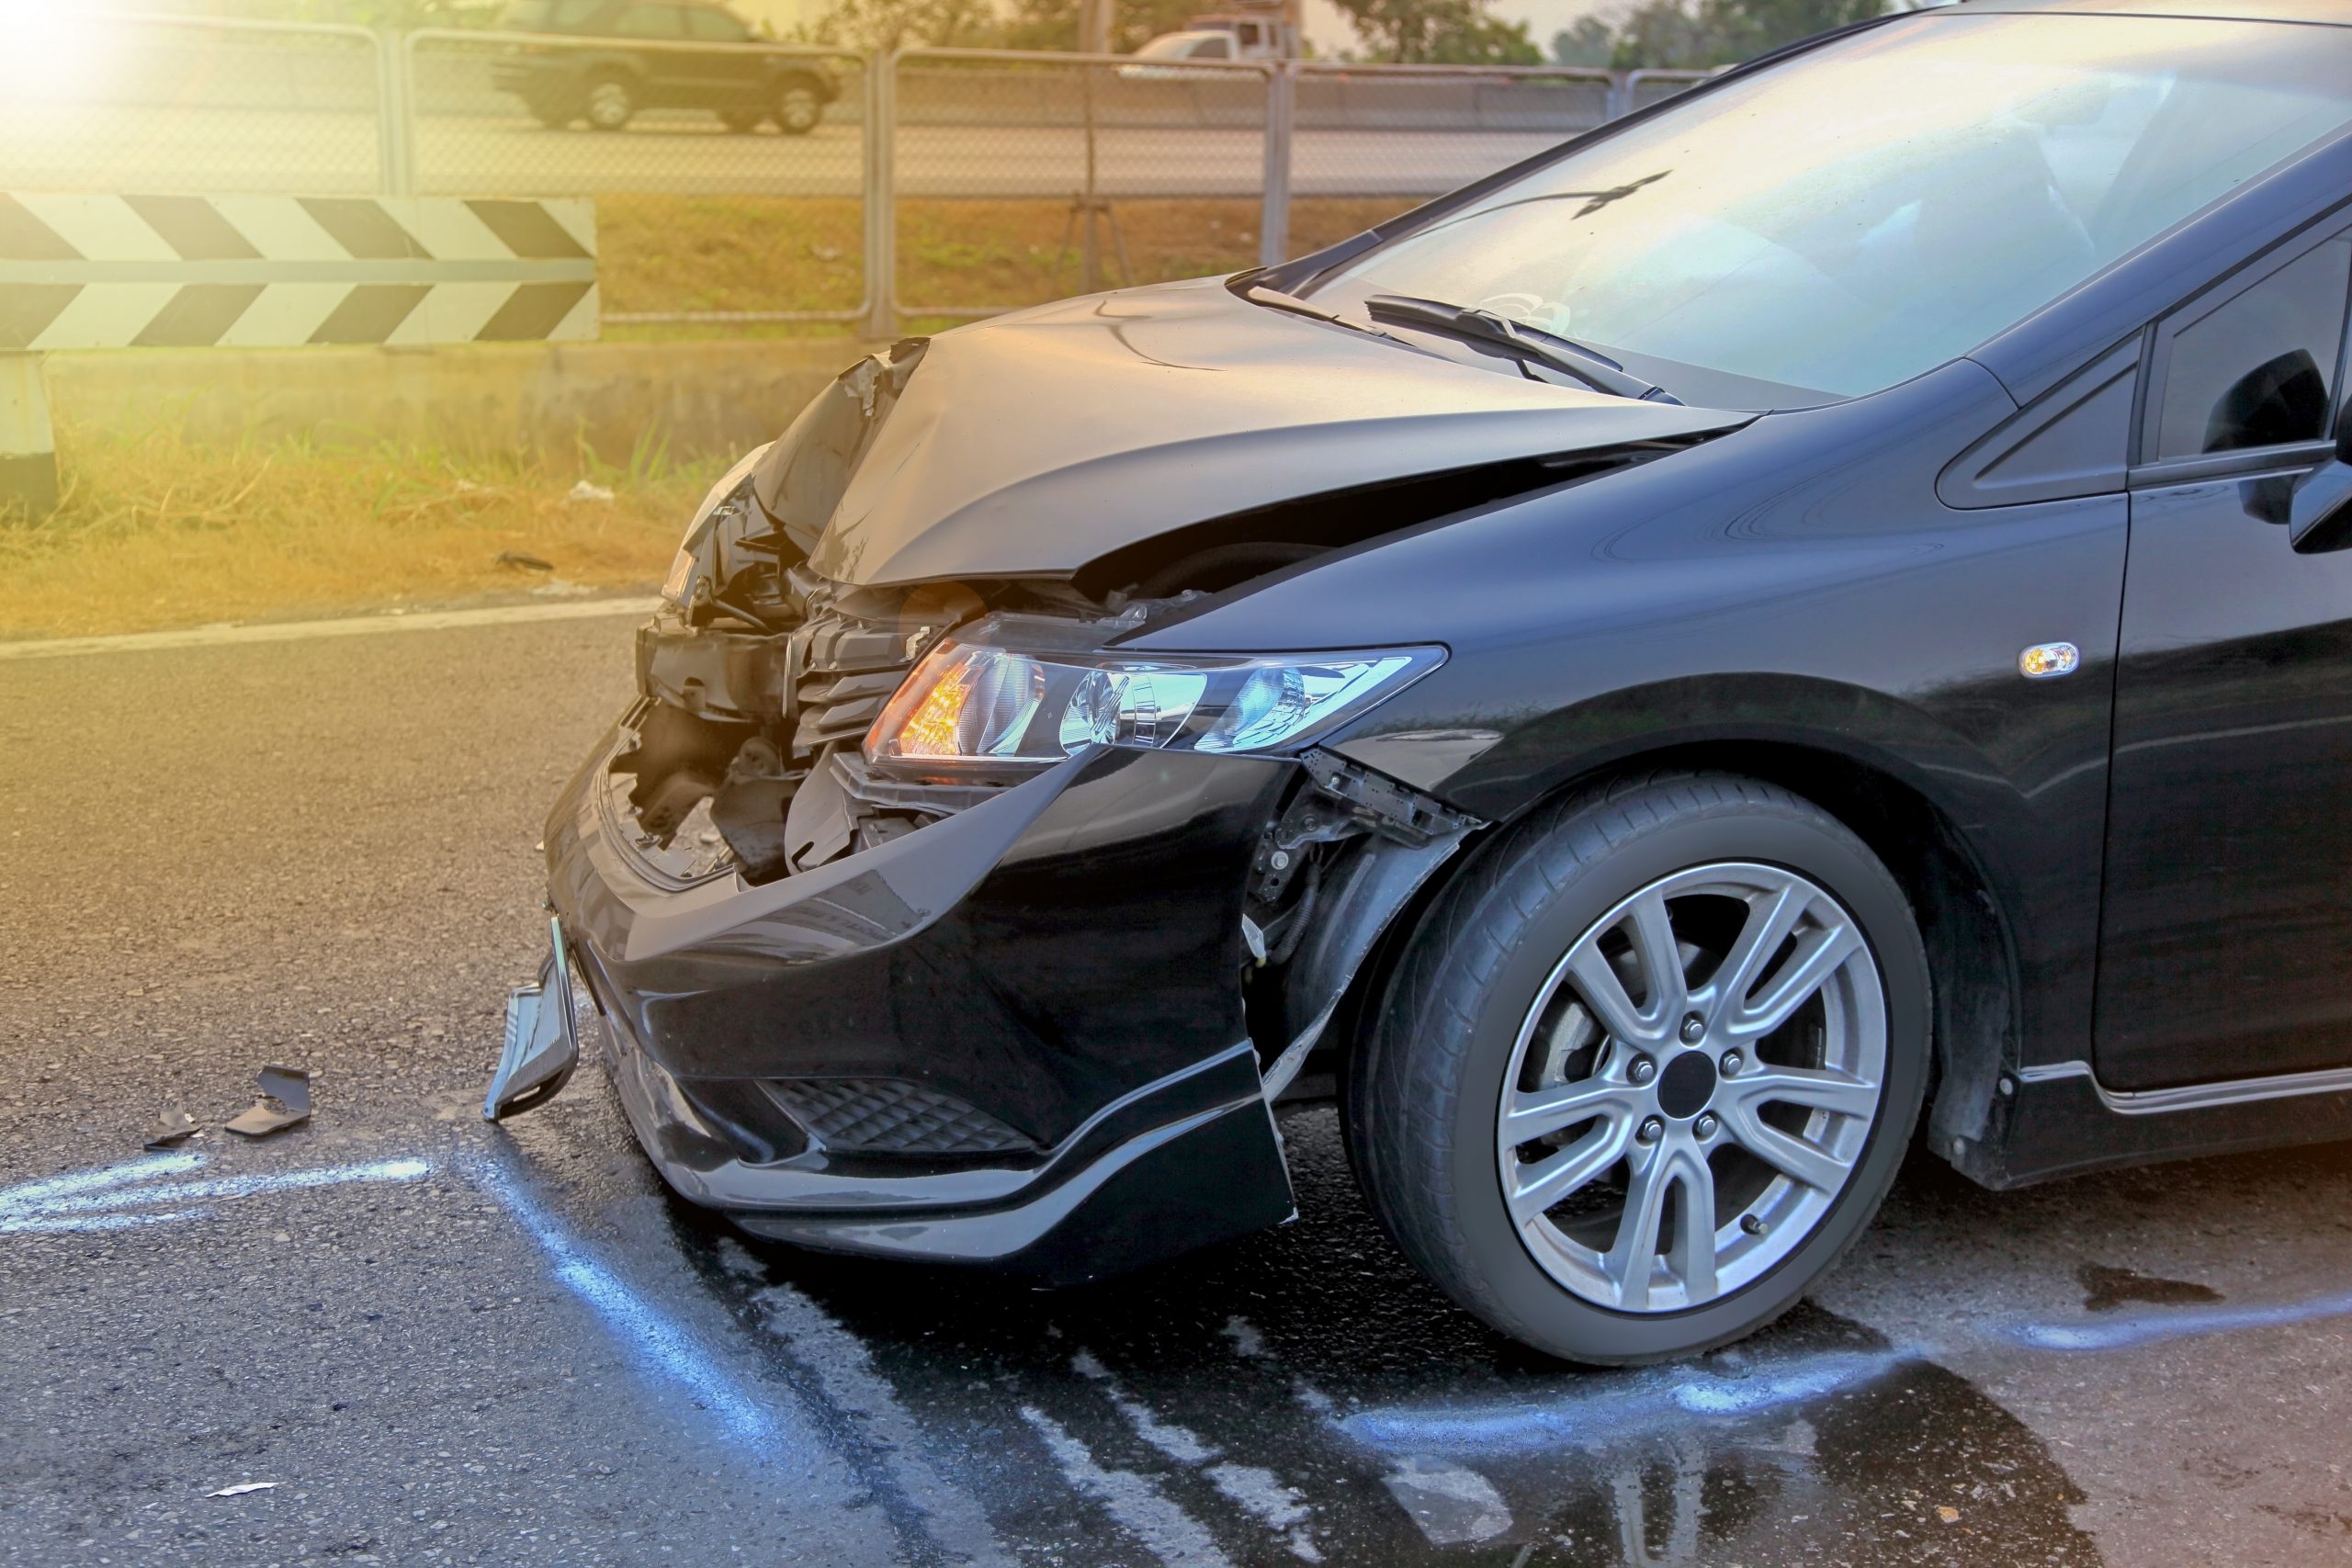 Baltimore car accident lawyers